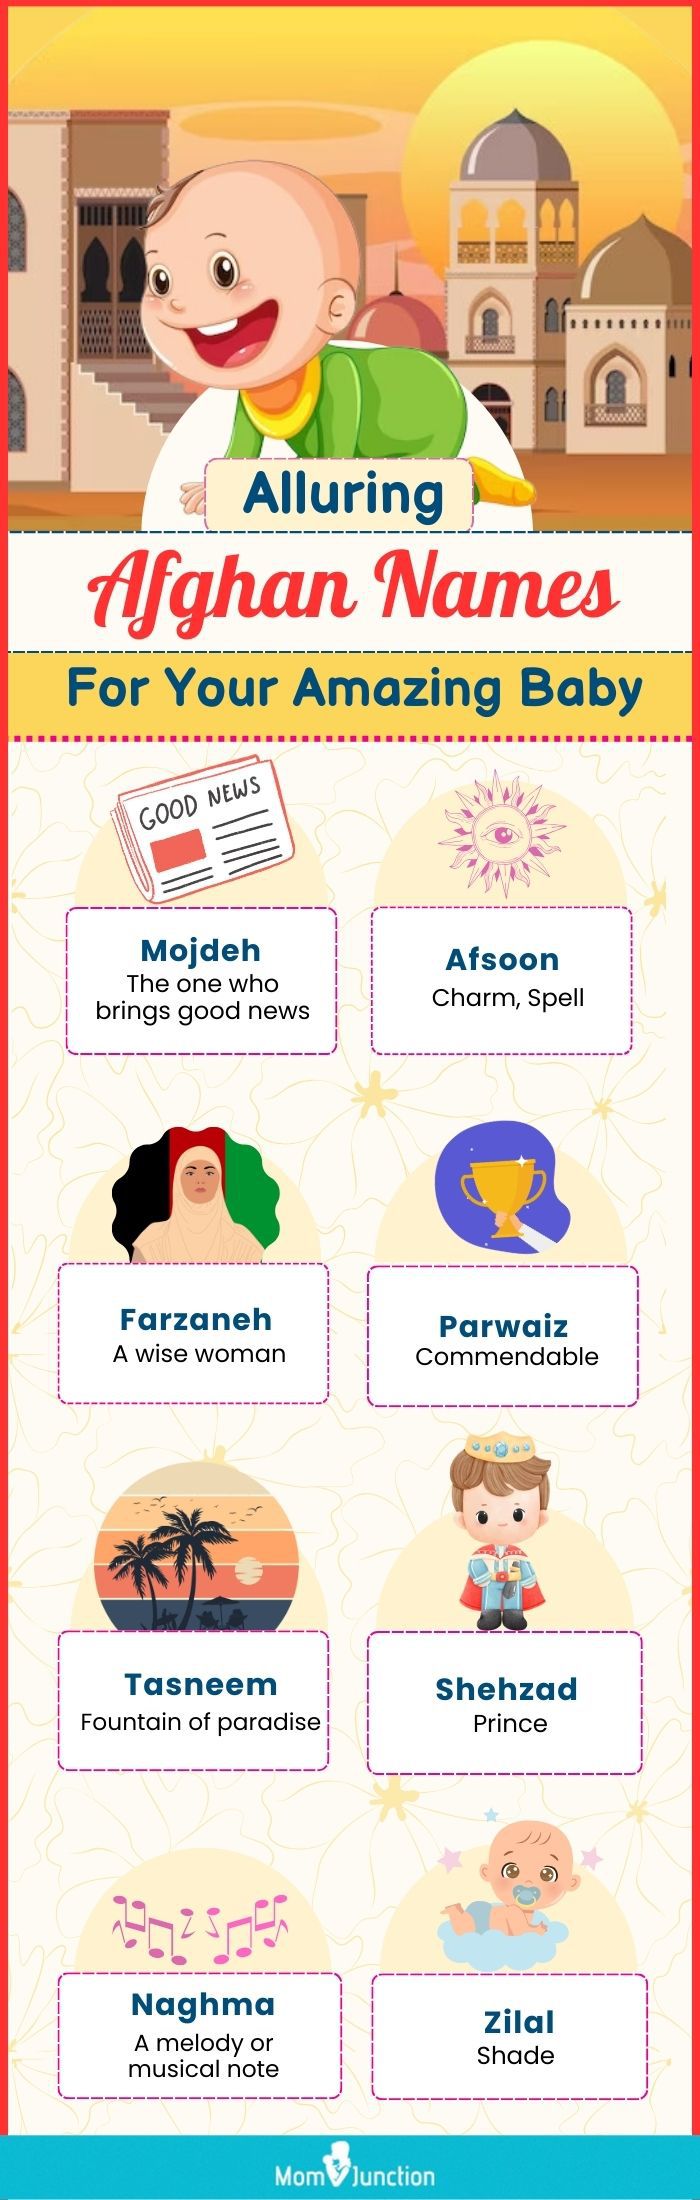 alluring afghan names for your amazing baby (infographic)